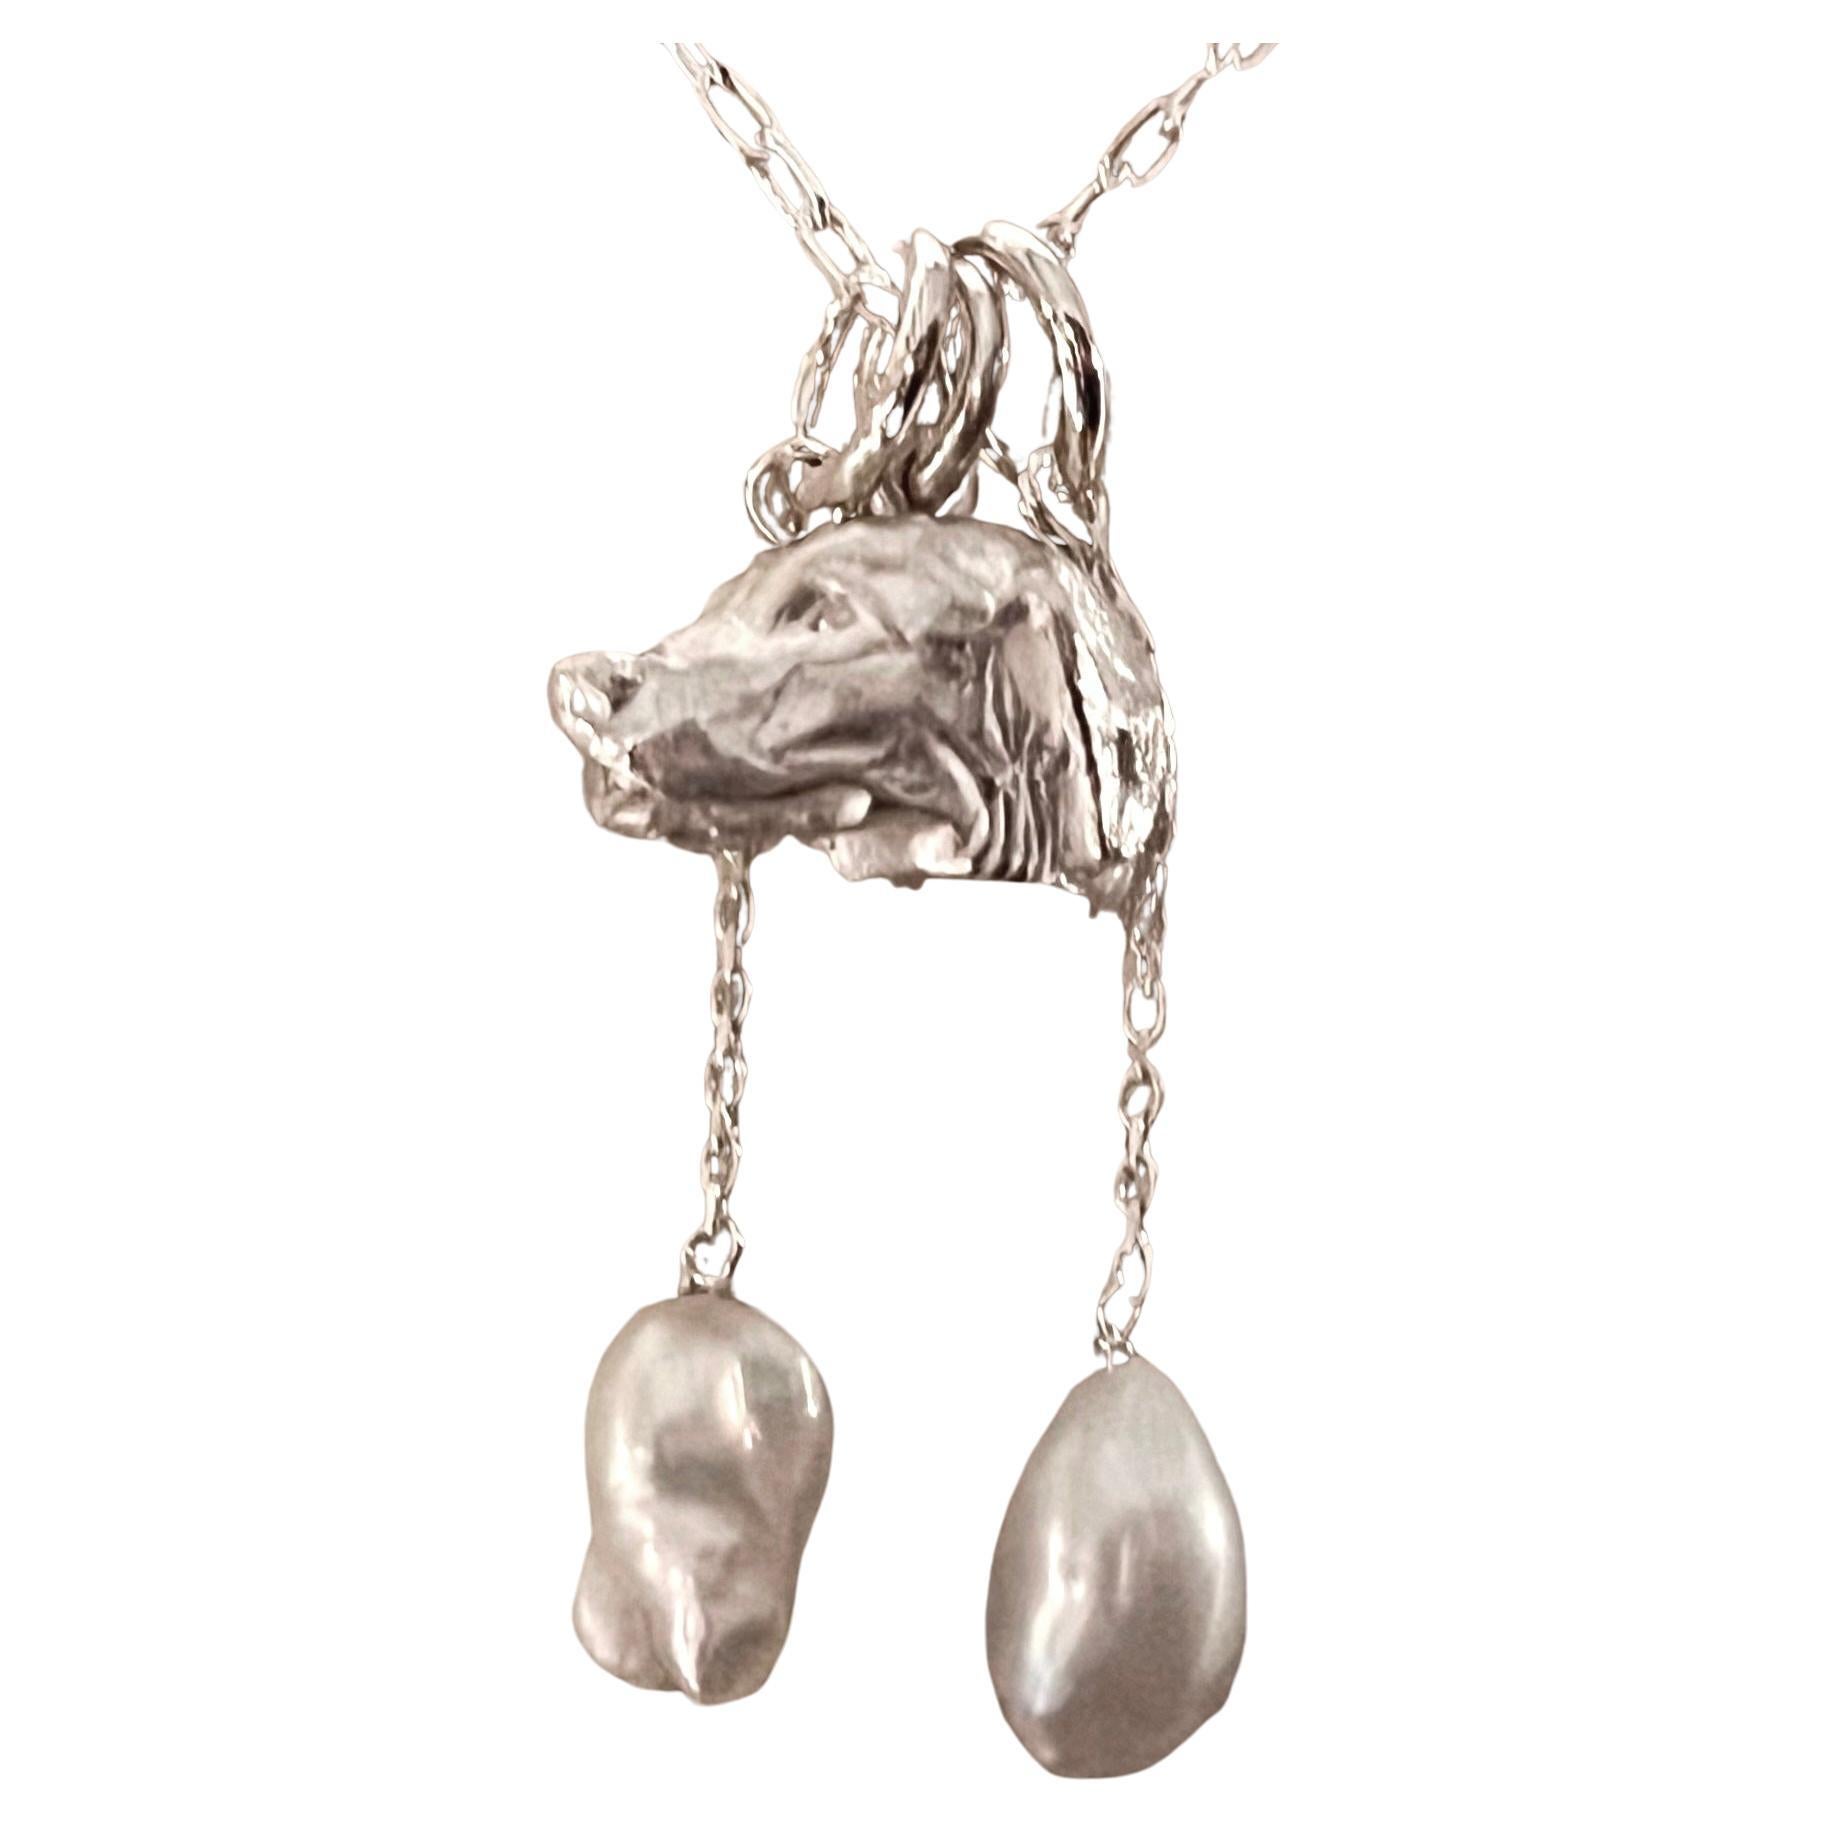 Paul Eaton Sculpted Retriever Dog Head Pendant with One or Two Pearl Drops For Sale